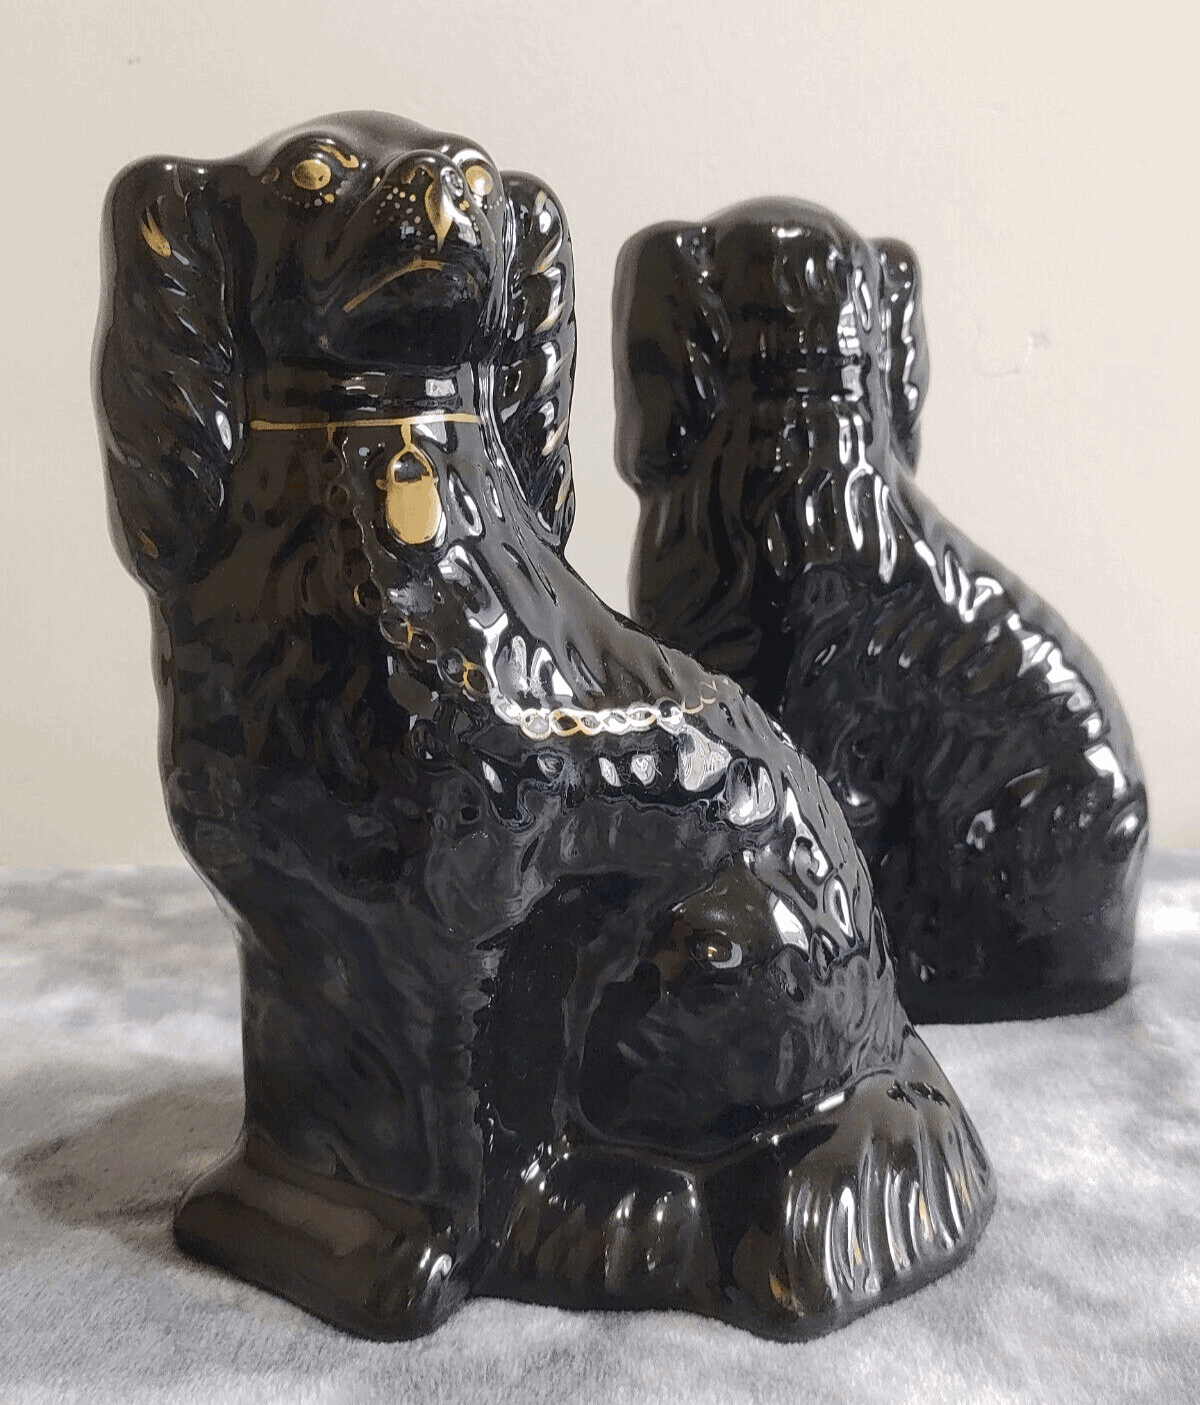 19th Century Antique Staffordshire Pottery Mantle Black Jackfield Spaniel Dogs Pair